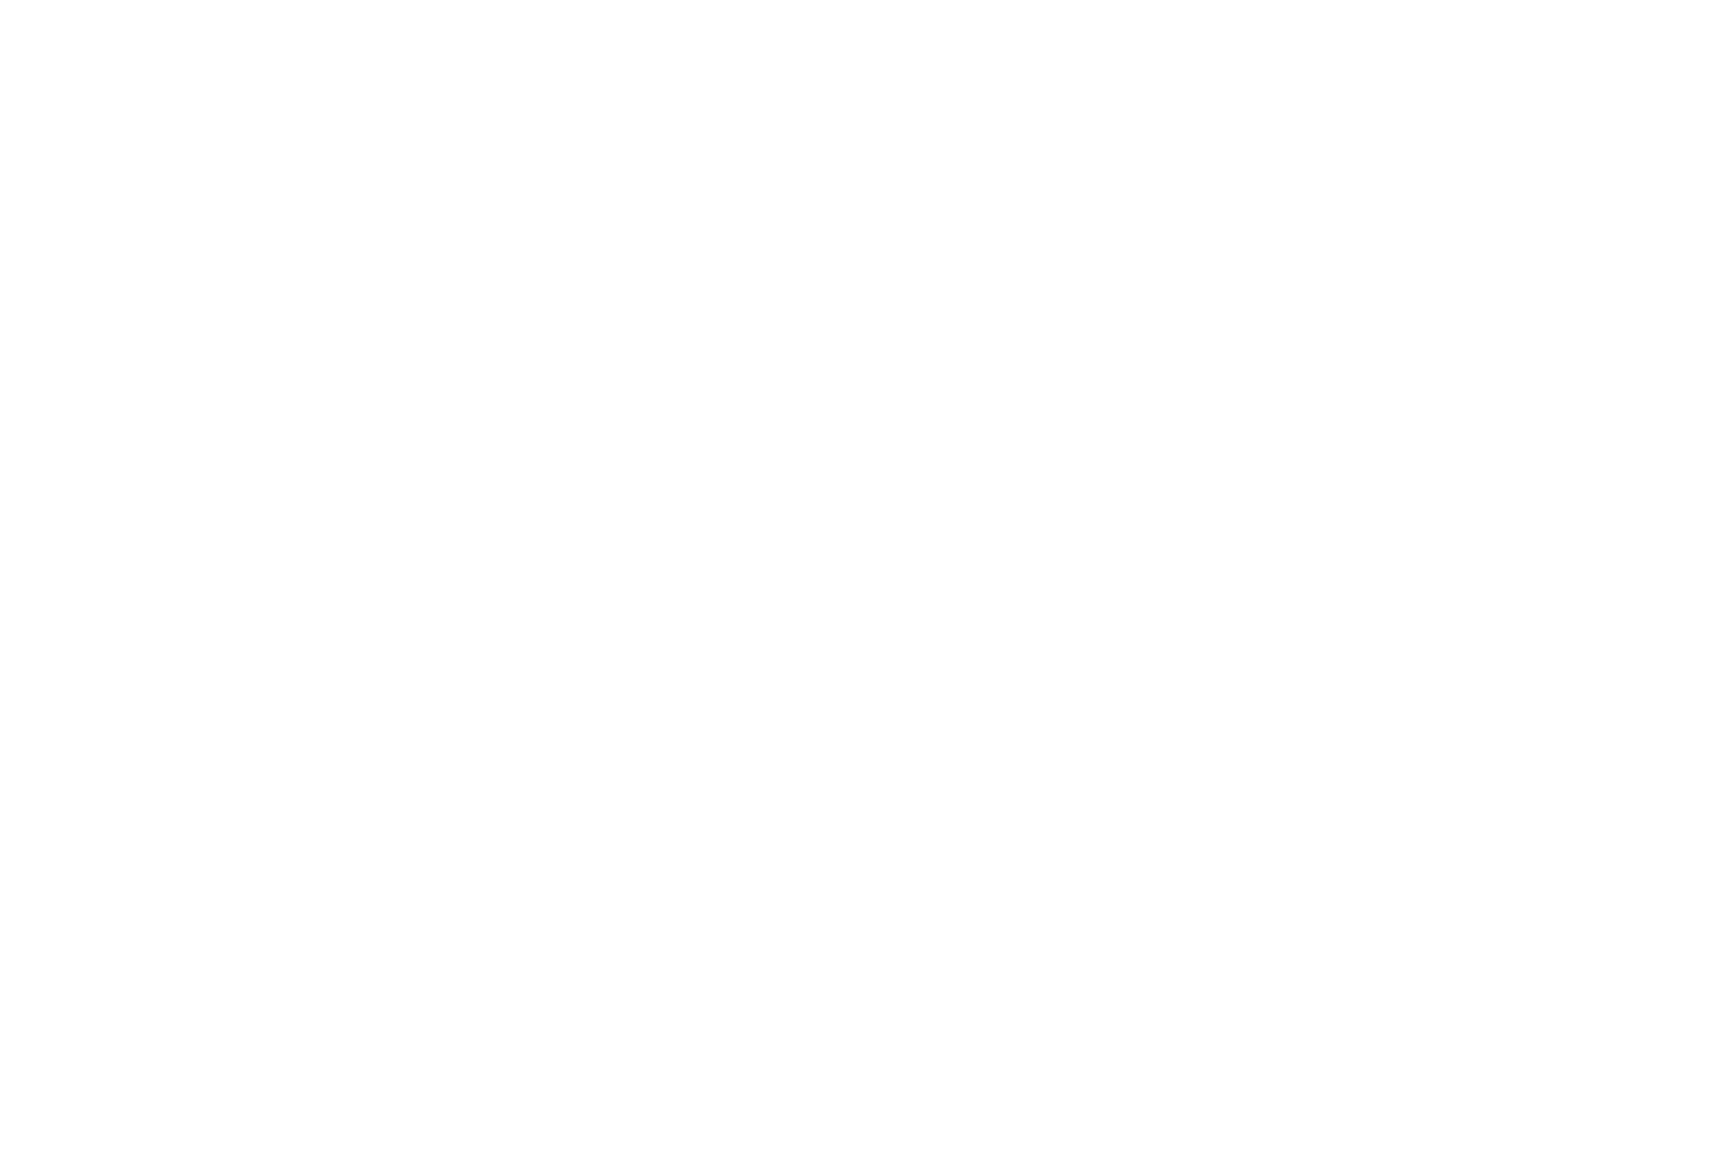 OFFICIAL SELECTION - DOC NYC - 2023 (1)